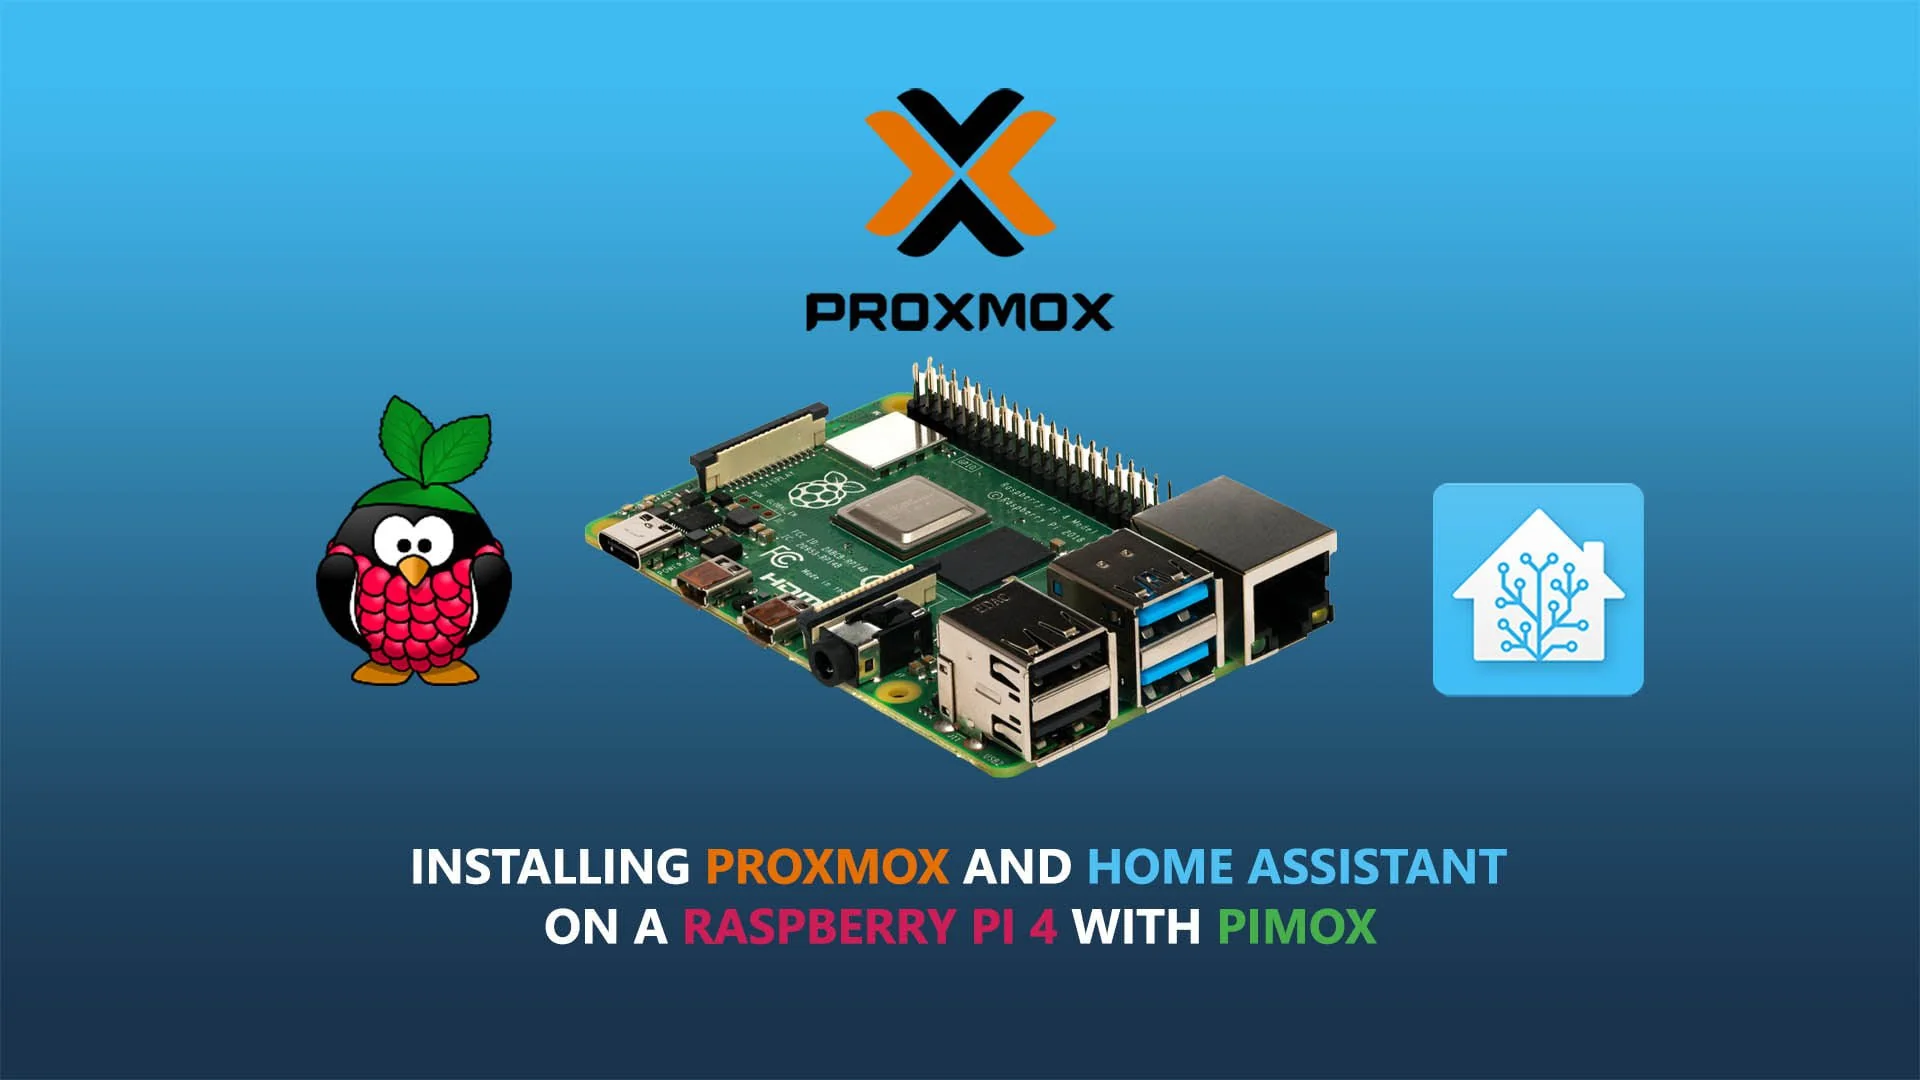 How to Install Proxmox on the Raspberry Pi?